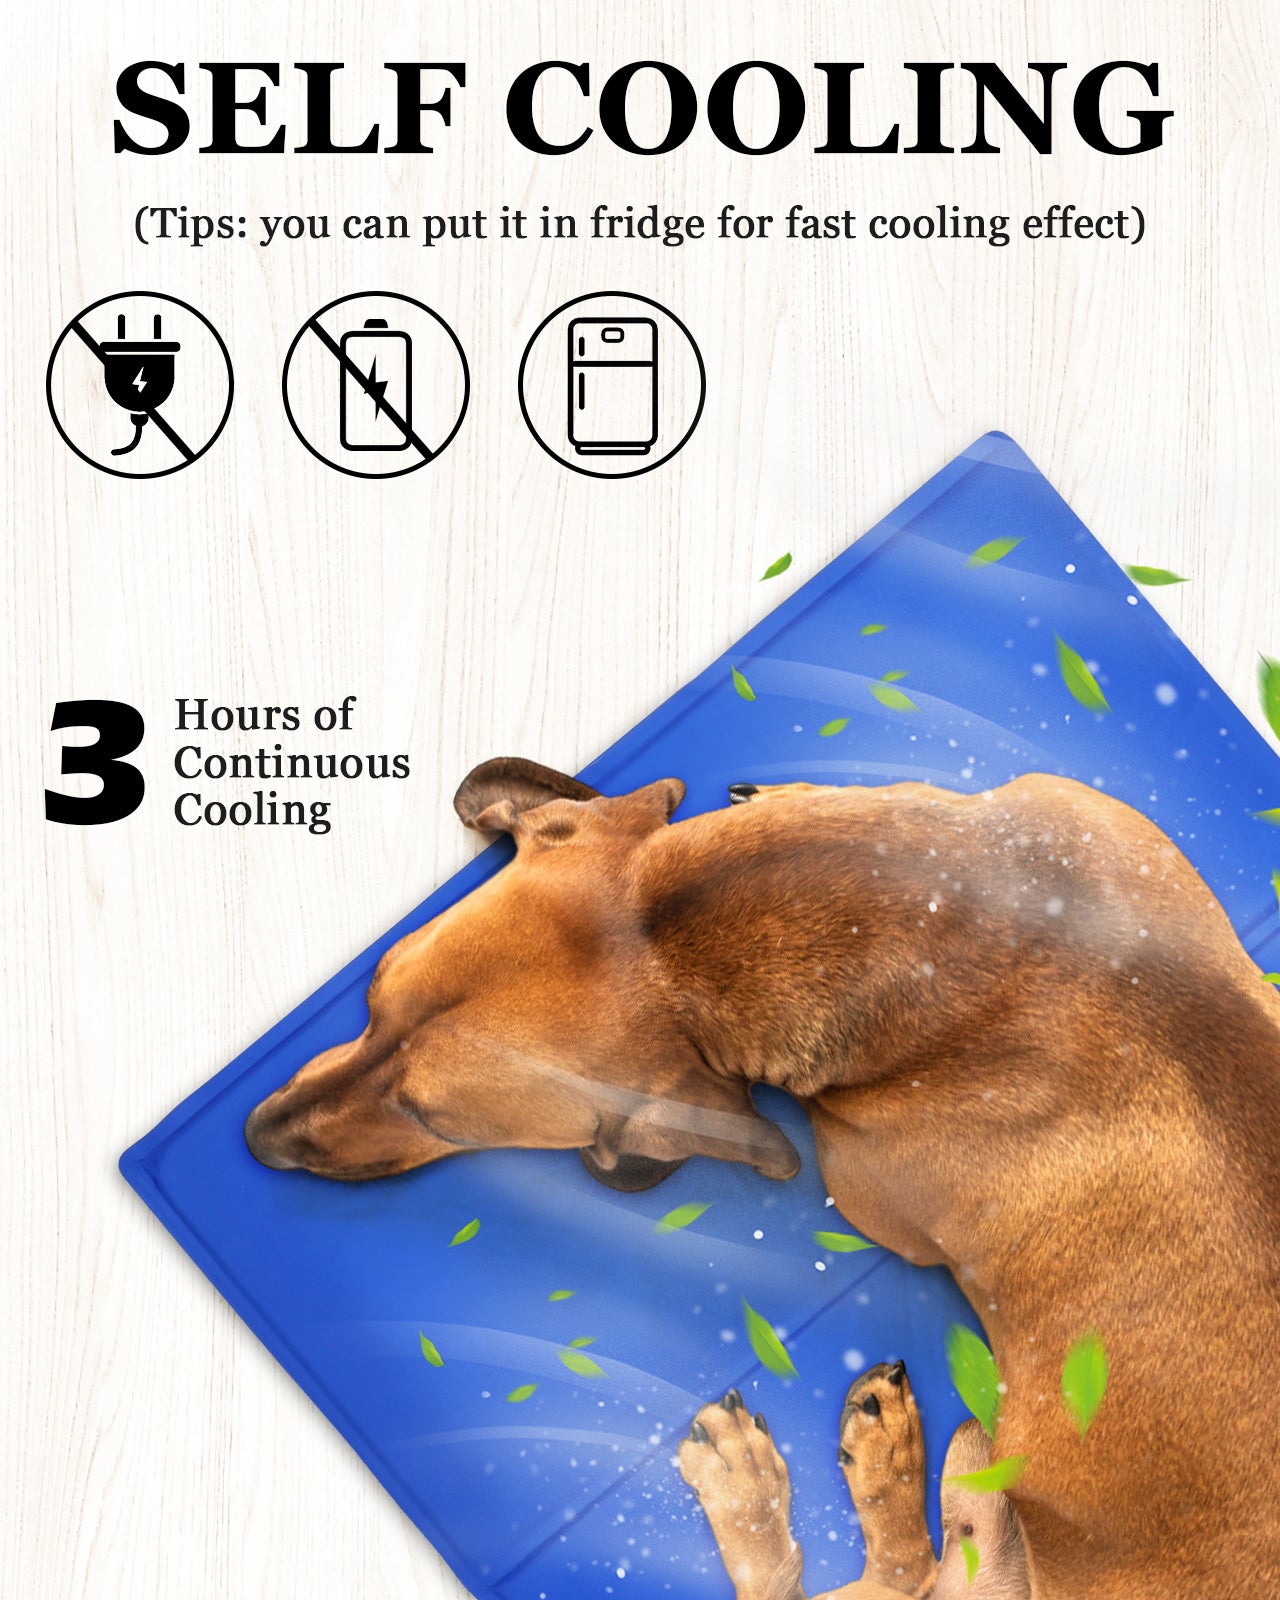 Zacro Dog Cooling Mat 39"x 28" - Pressure Activated Self Cooling Pad for Dogs Cats, 3 Hour Gel Cooling Dog Bed Mats for Crate, Home, Travel, Large